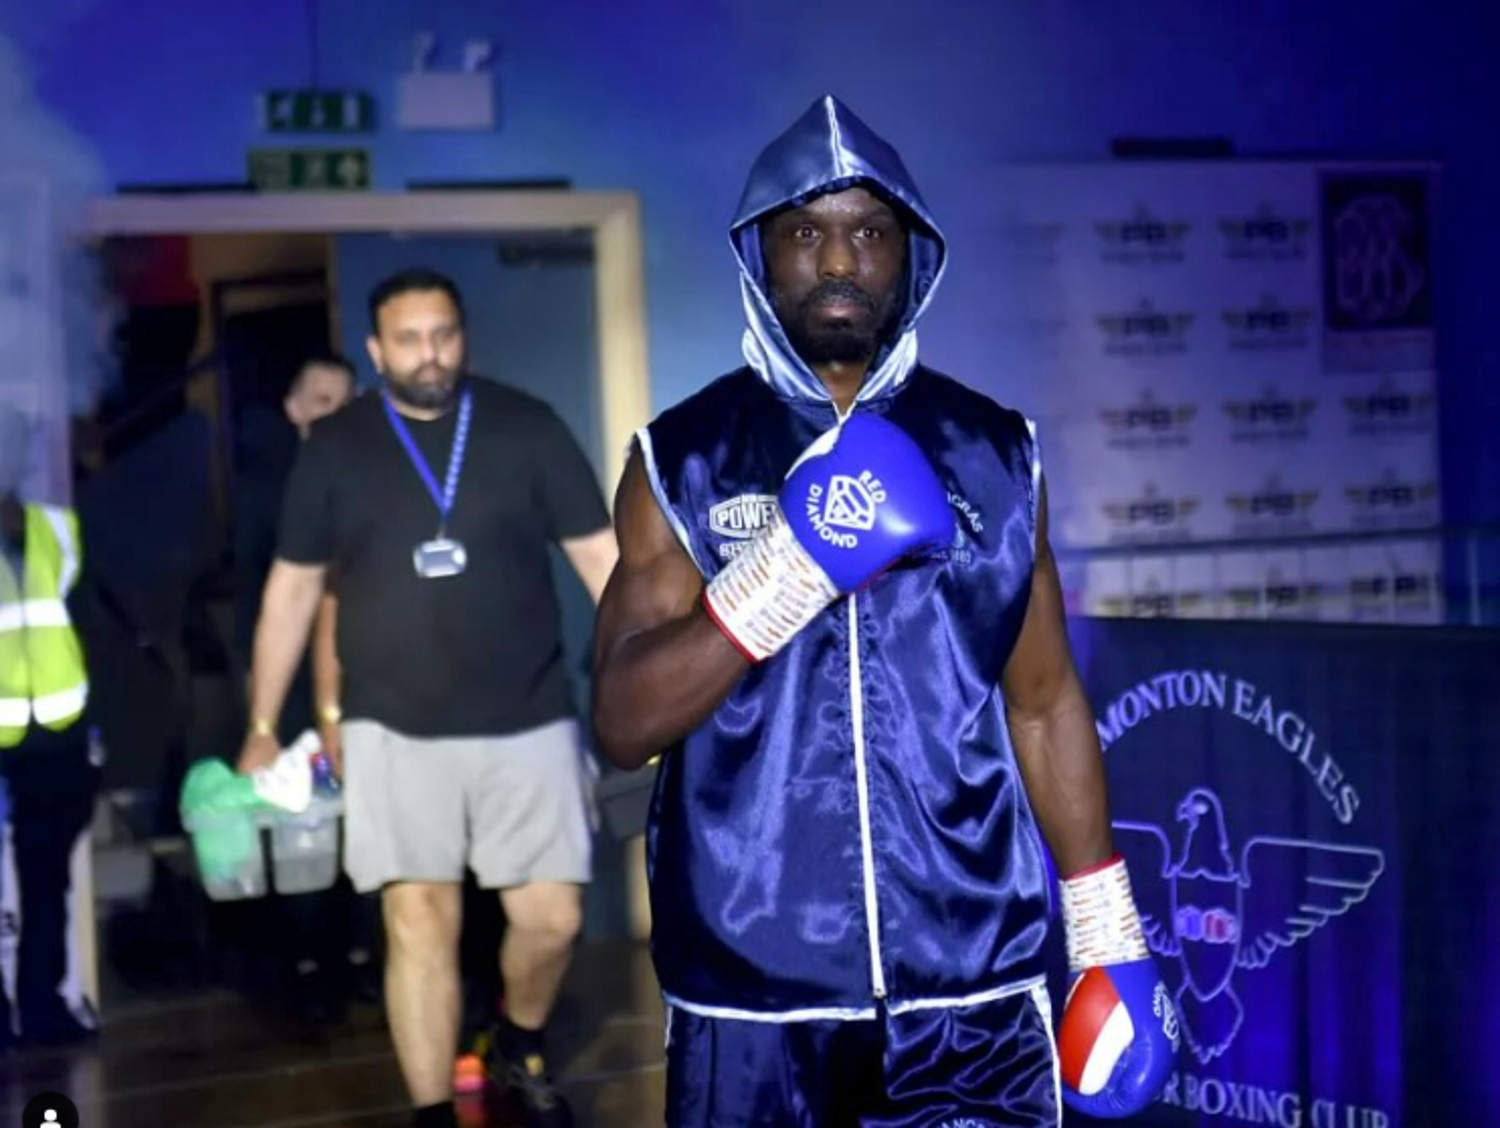 British boxer Sherif Lawal dies after collapsing in the ring in professional debut